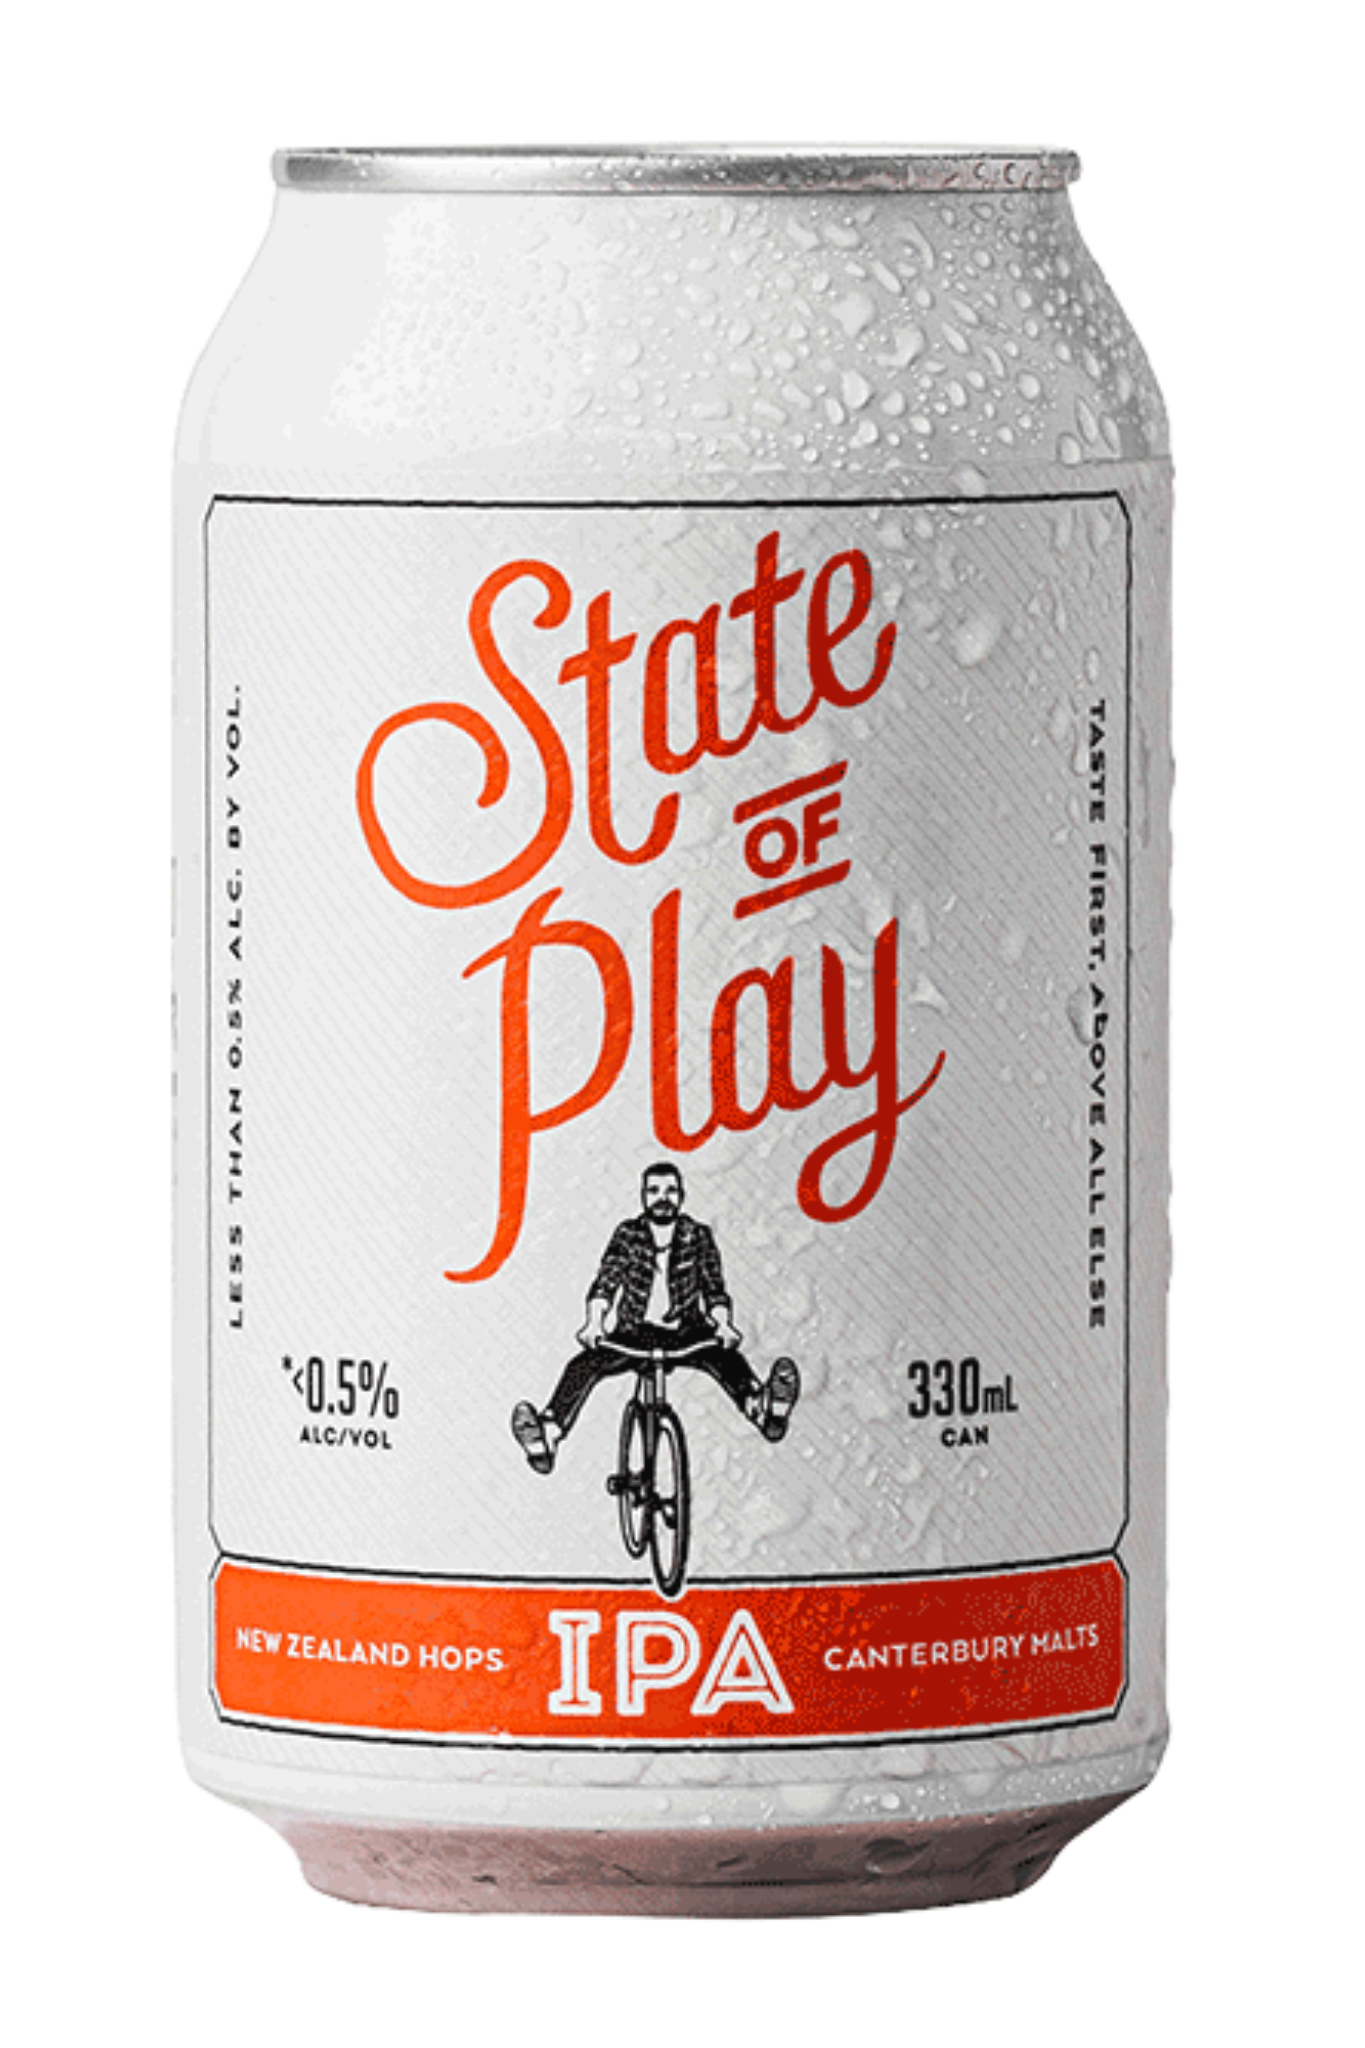 State Of Play Non Alcoholic IPA